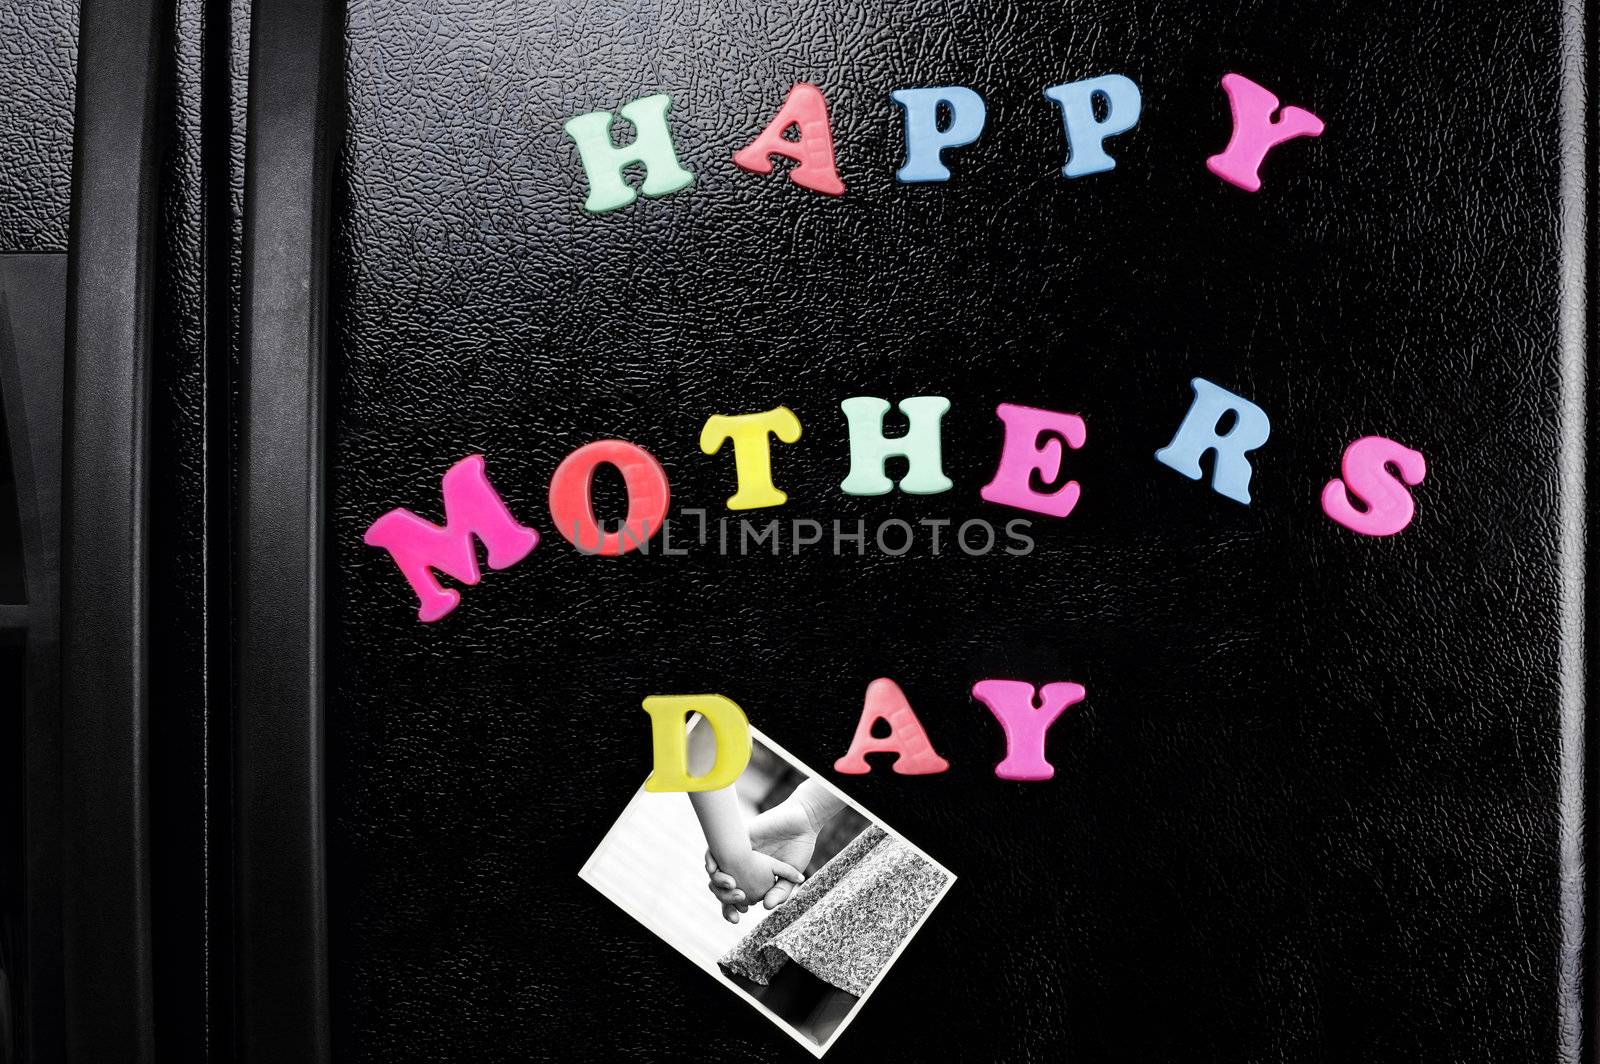 Refrigerator magnets with the message of "Happy Mother's Day" and a photo of a father and child holding hands.